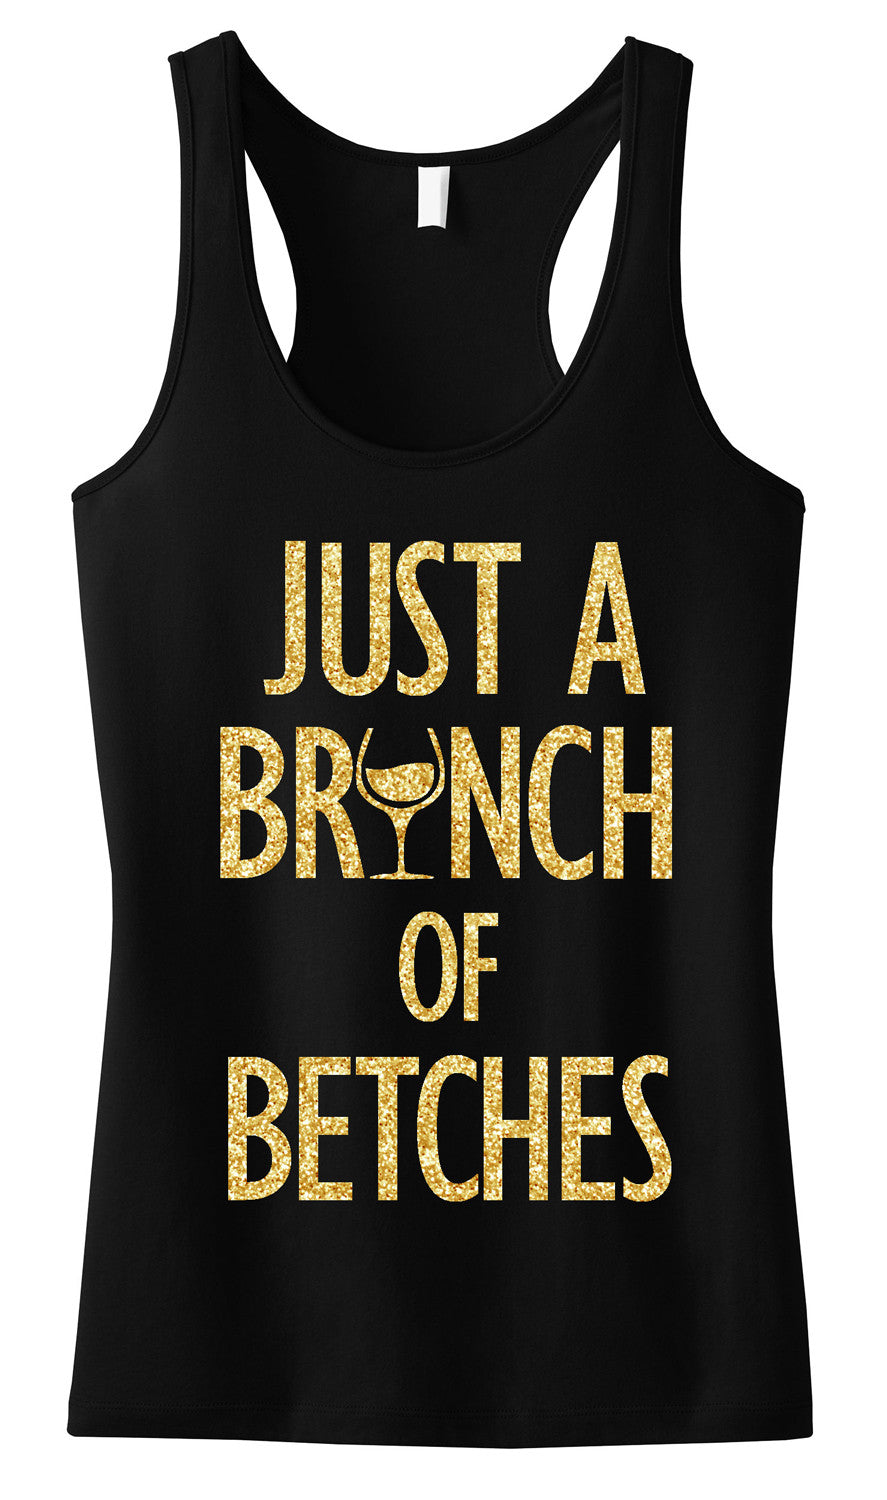 JUST a BRUNCH of BETCHES Gold Brunch Party Tank